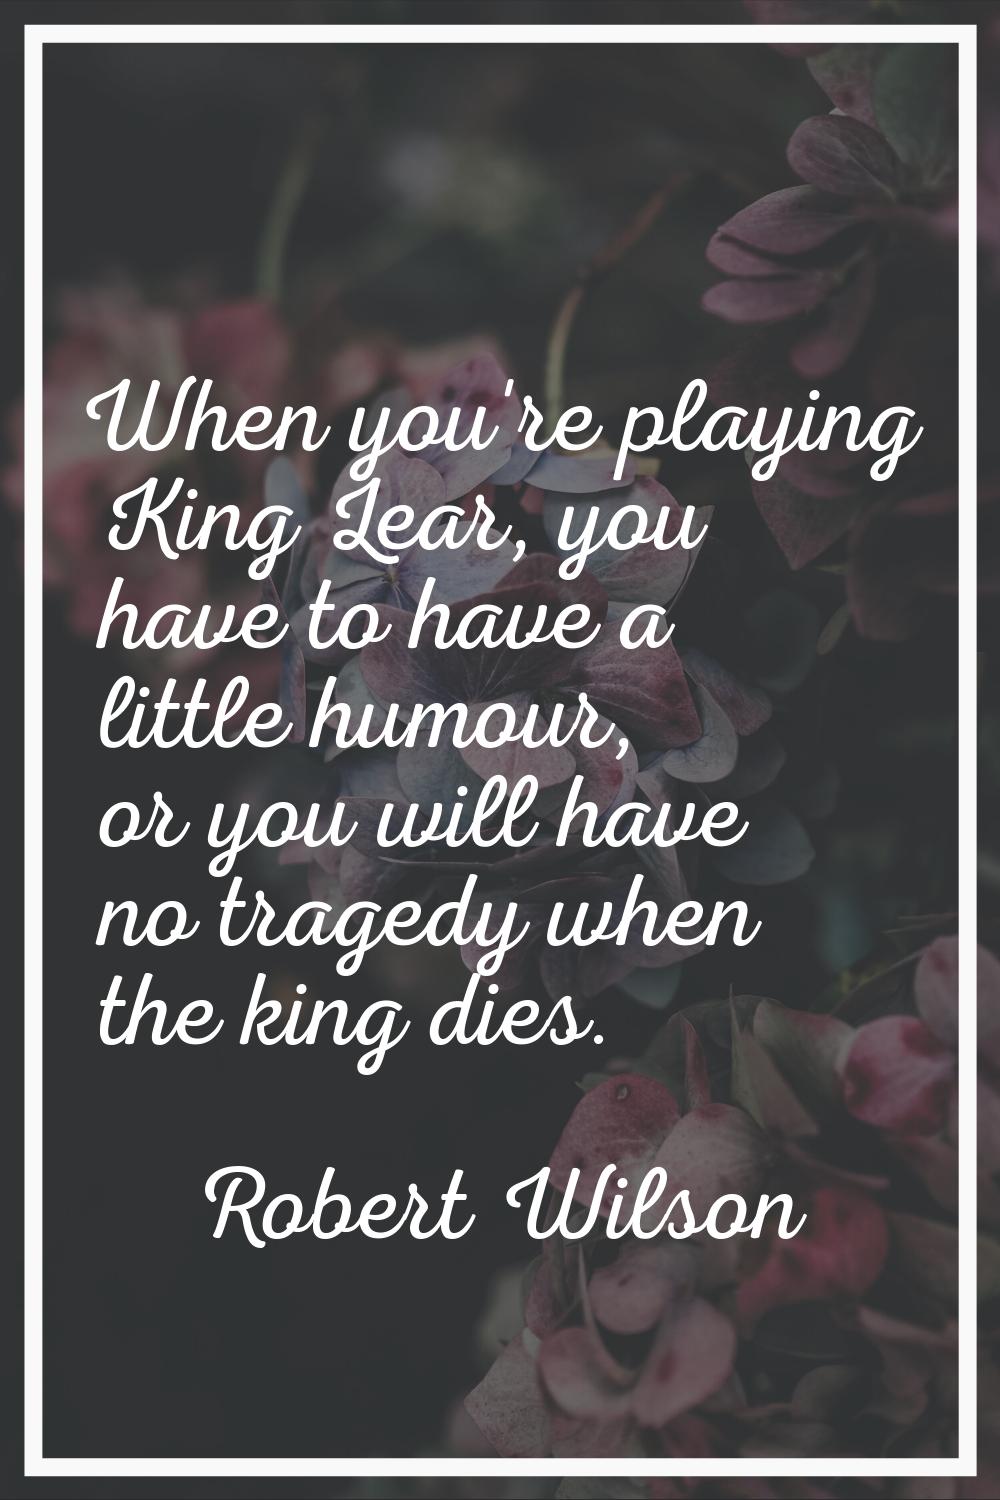 When you're playing King Lear, you have to have a little humour, or you will have no tragedy when t